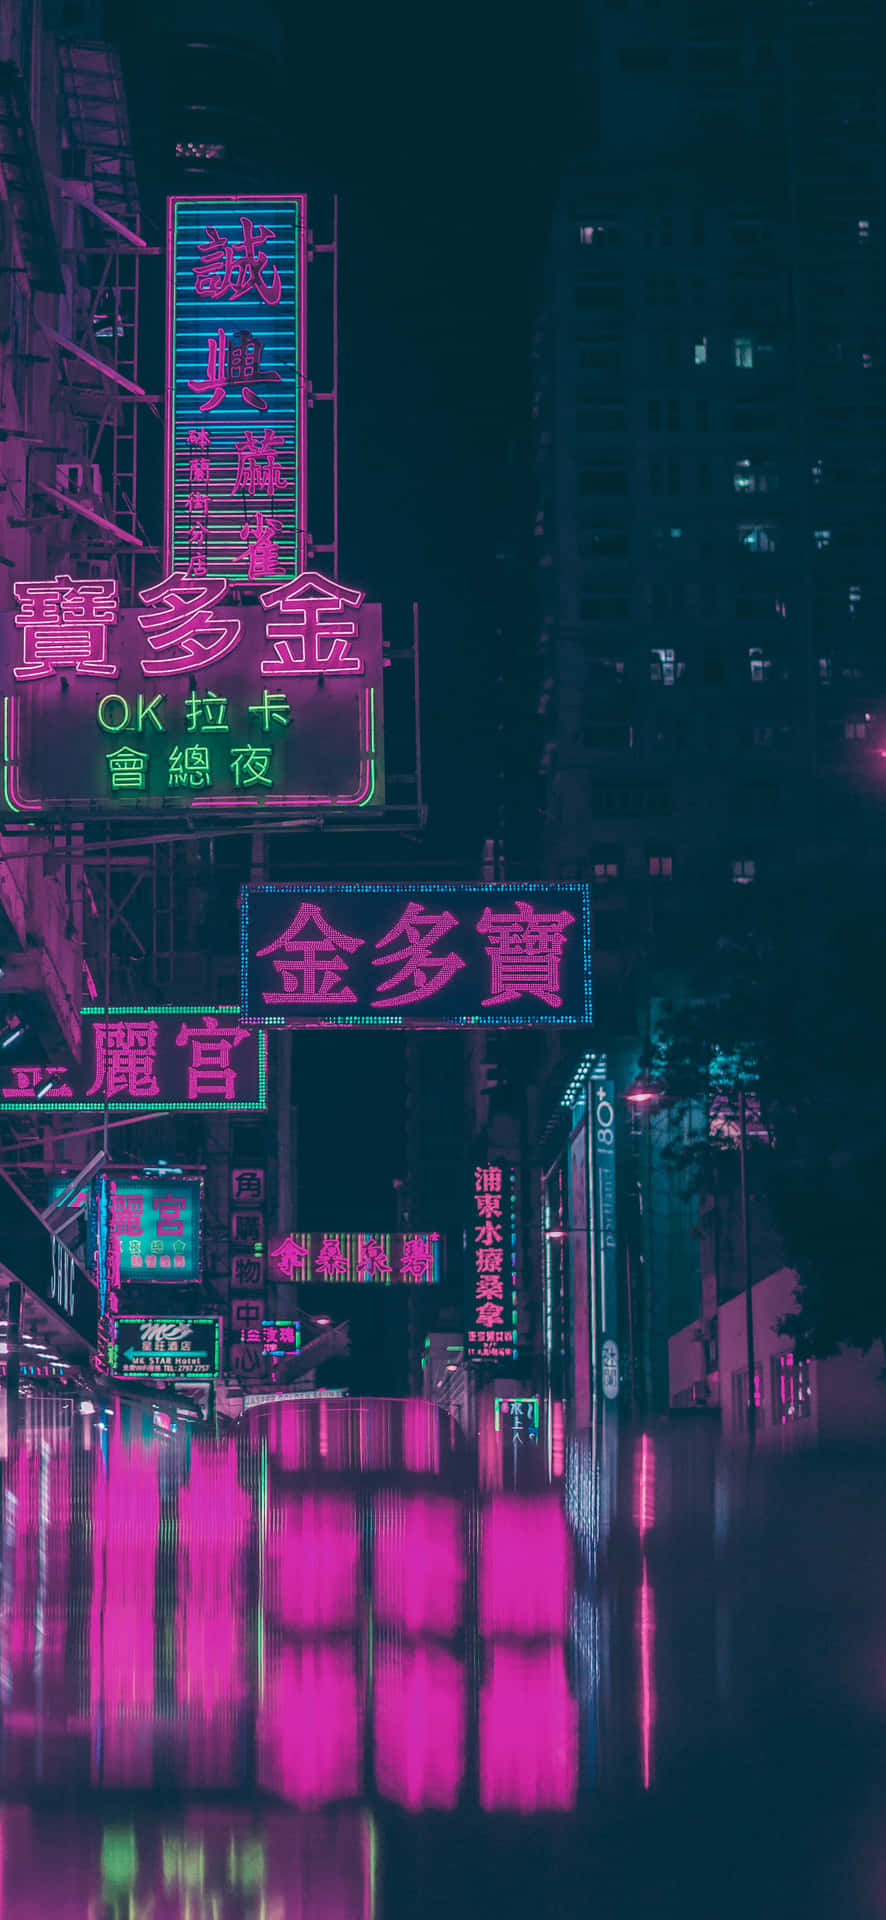 Neon Signs In A City At Night Wallpaper